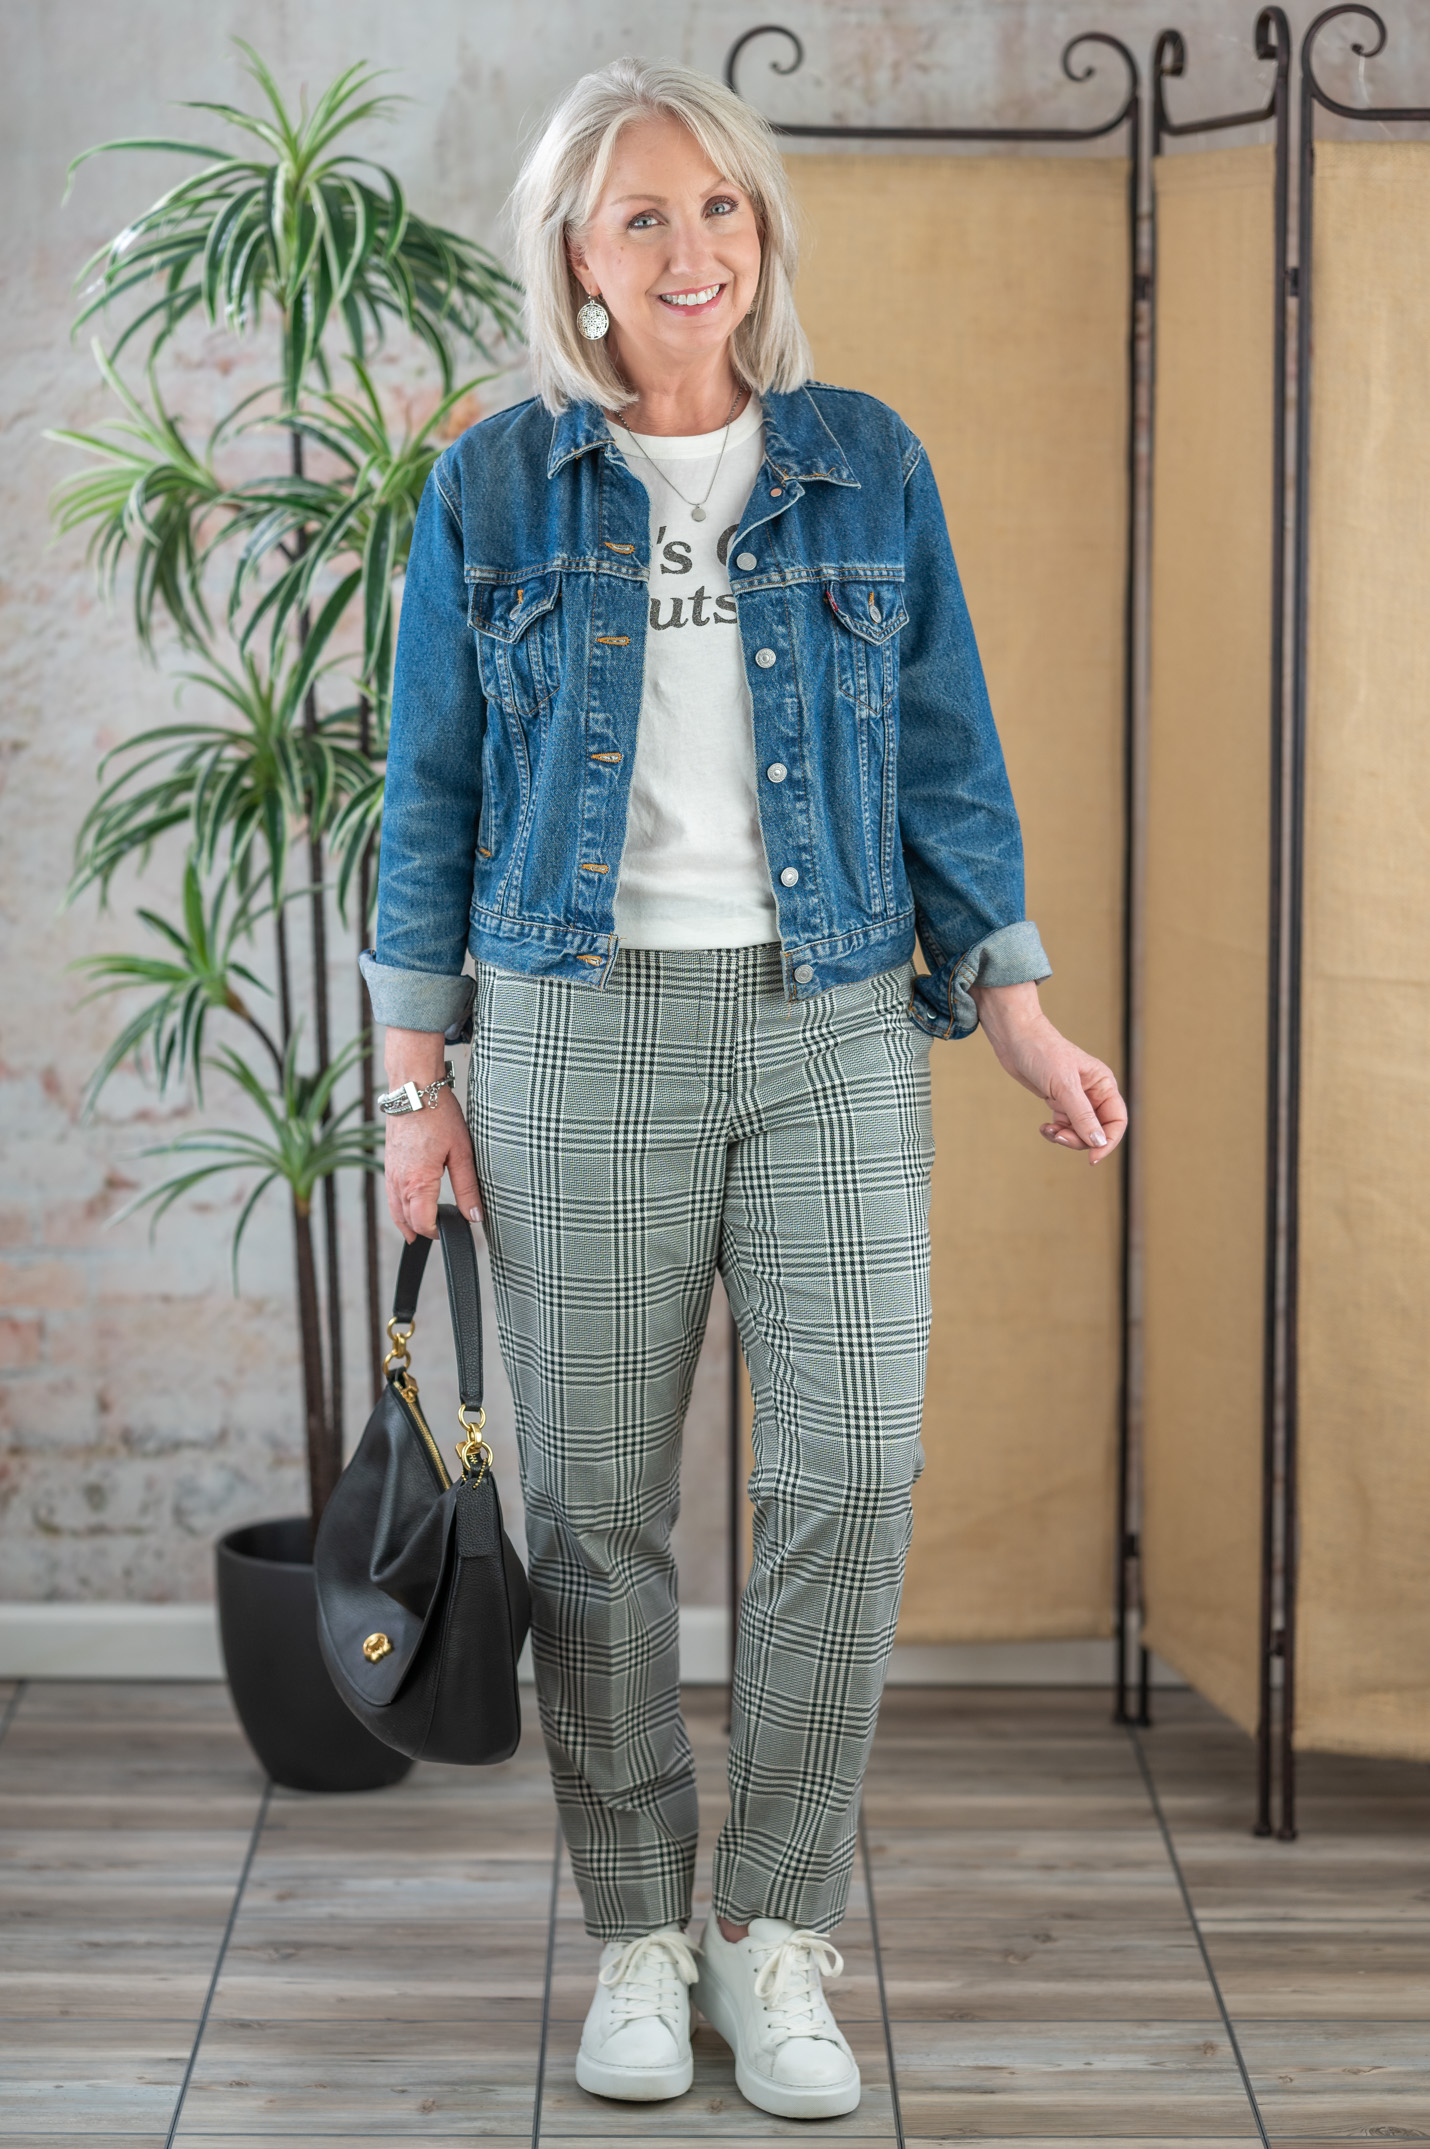 Graphic Tee & Jean Jacket with Glen Plaid Pants